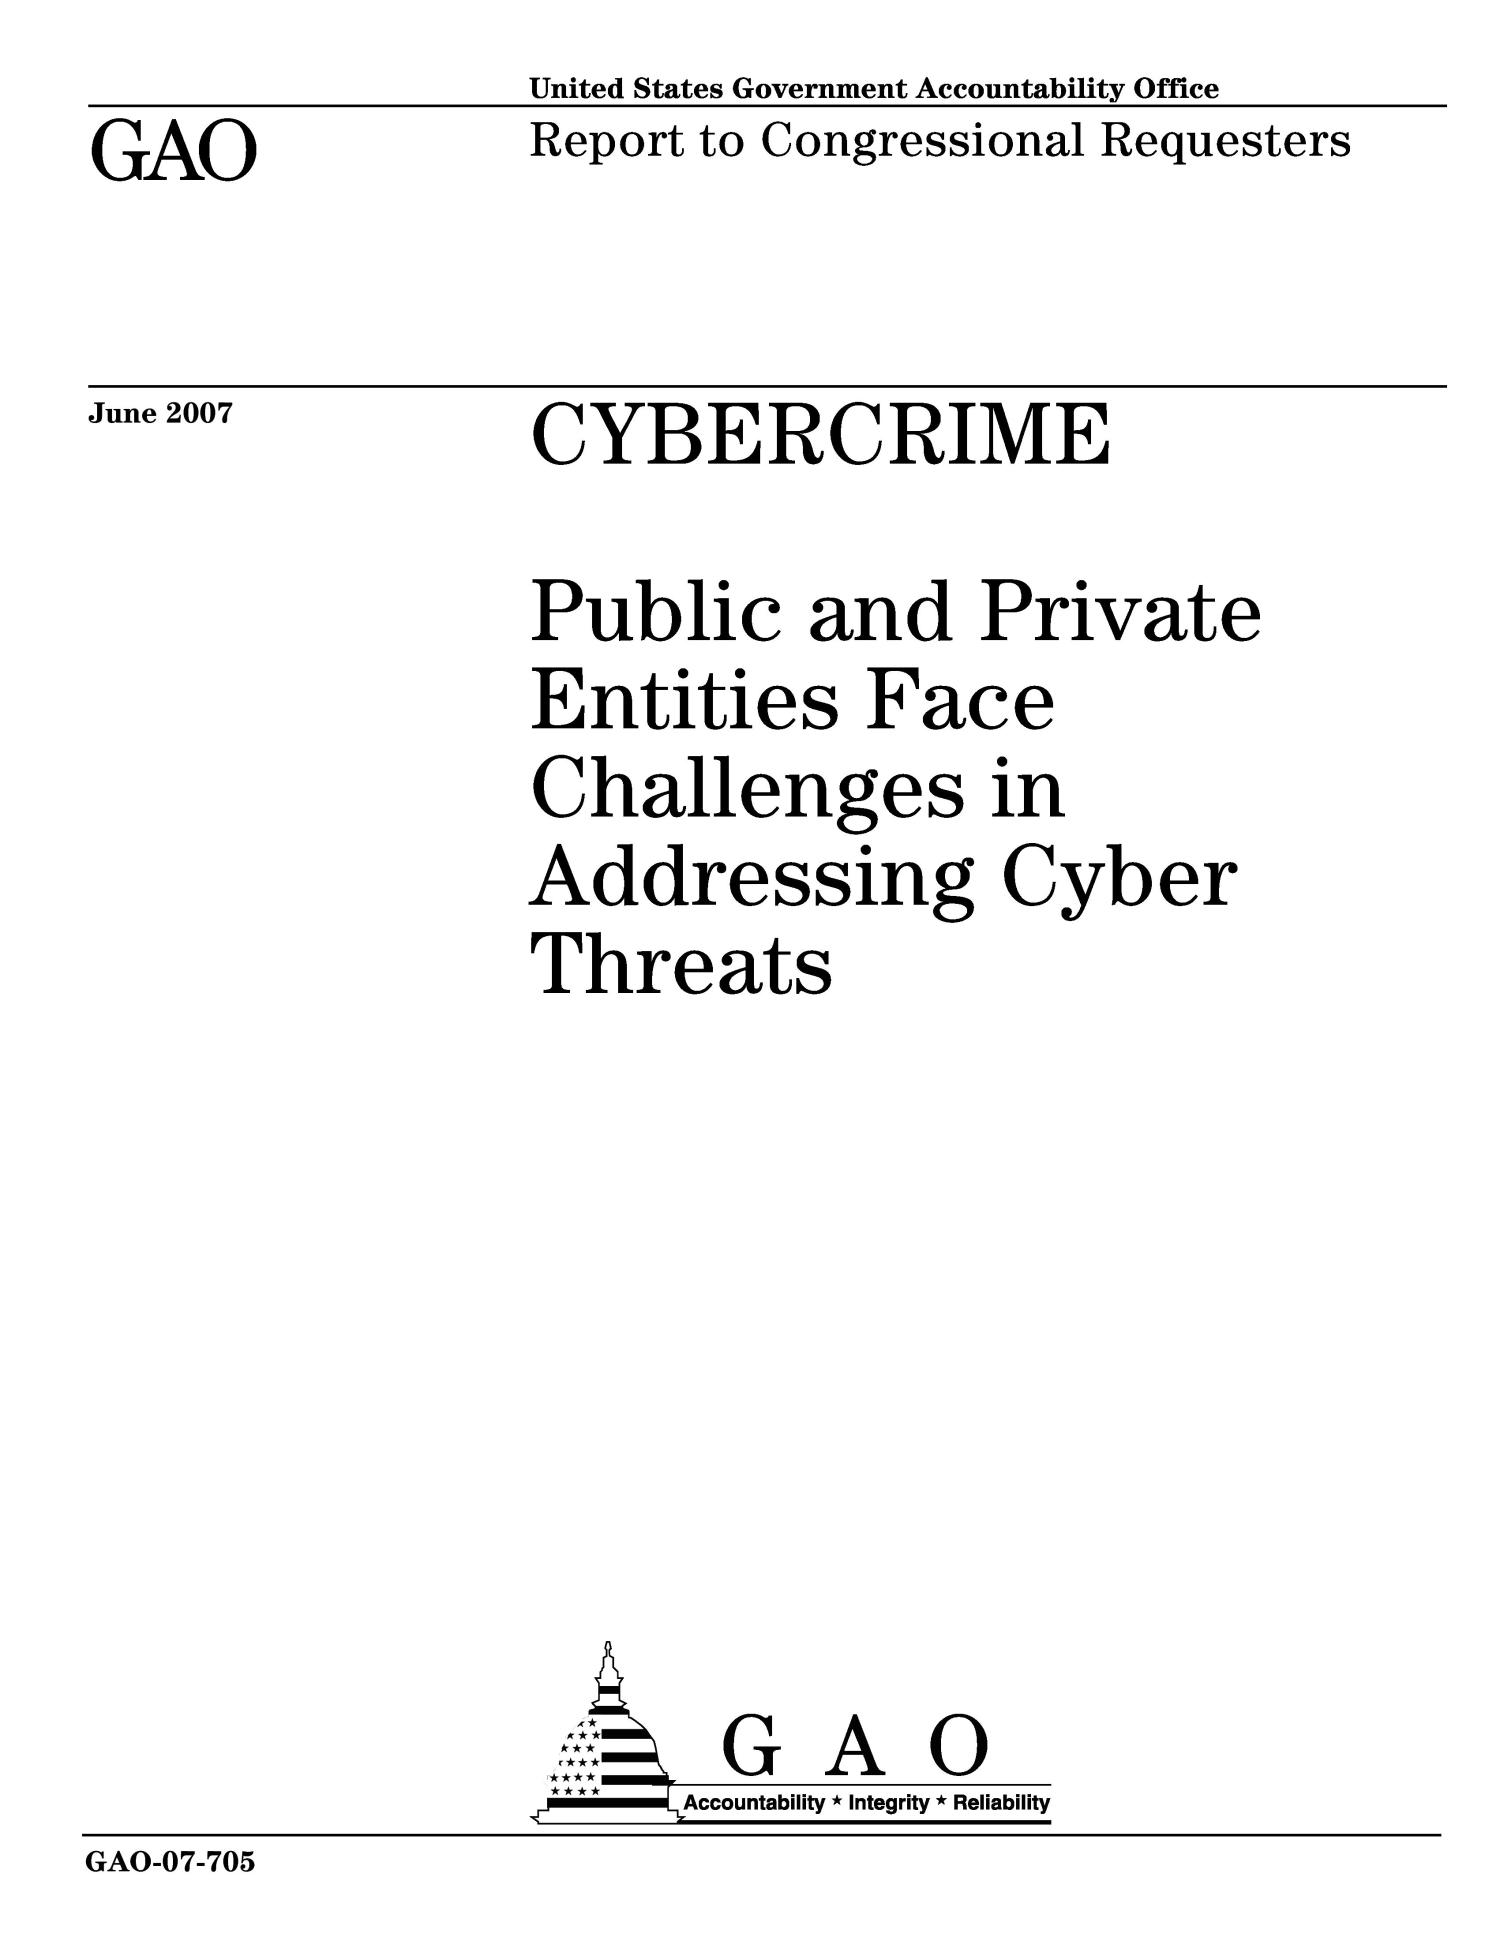 Cybercrime: Public and Private Entities Face Challenges in Addressing Cyber Threats
                                                
                                                    [Sequence #]: 1 of 59
                                                